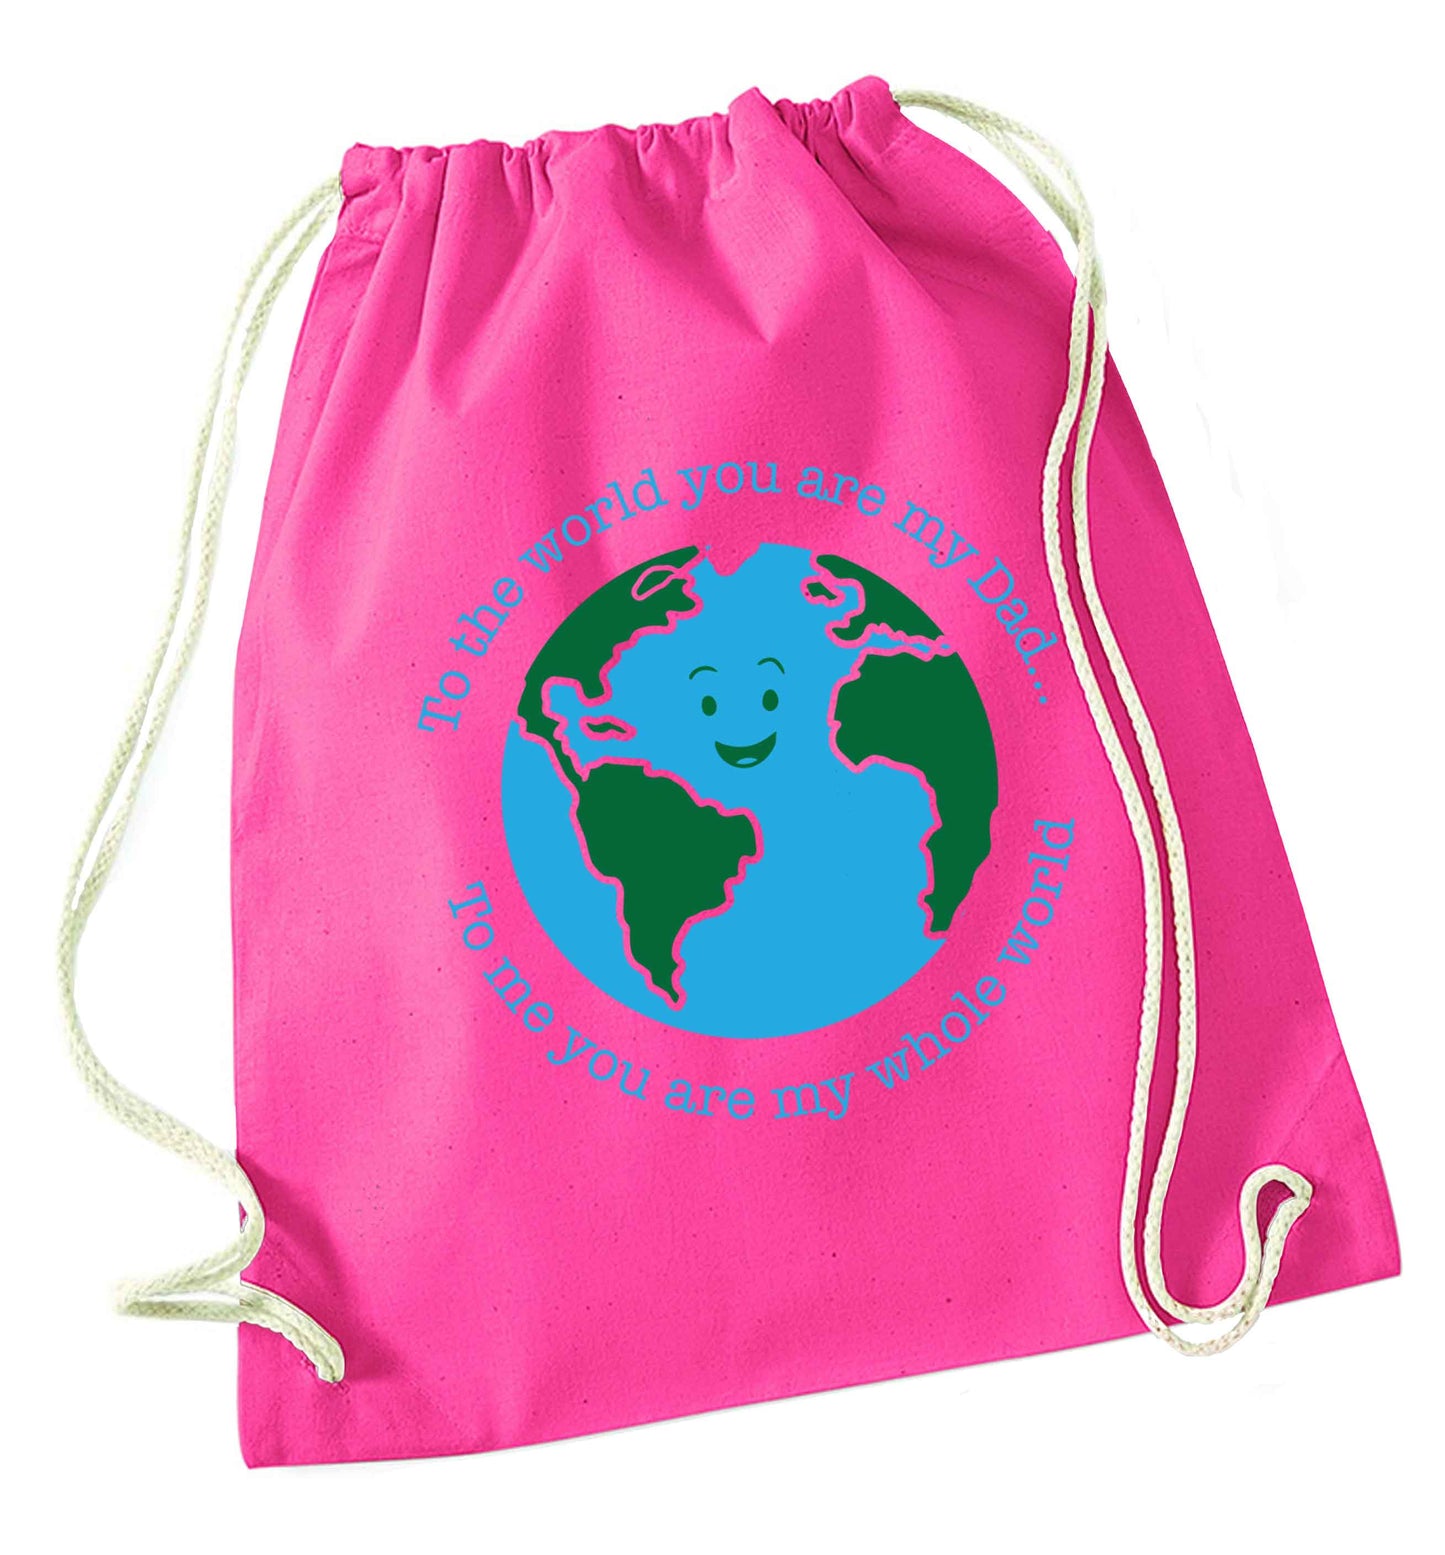 To the world you are my dad, to me you are my whole world pink drawstring bag